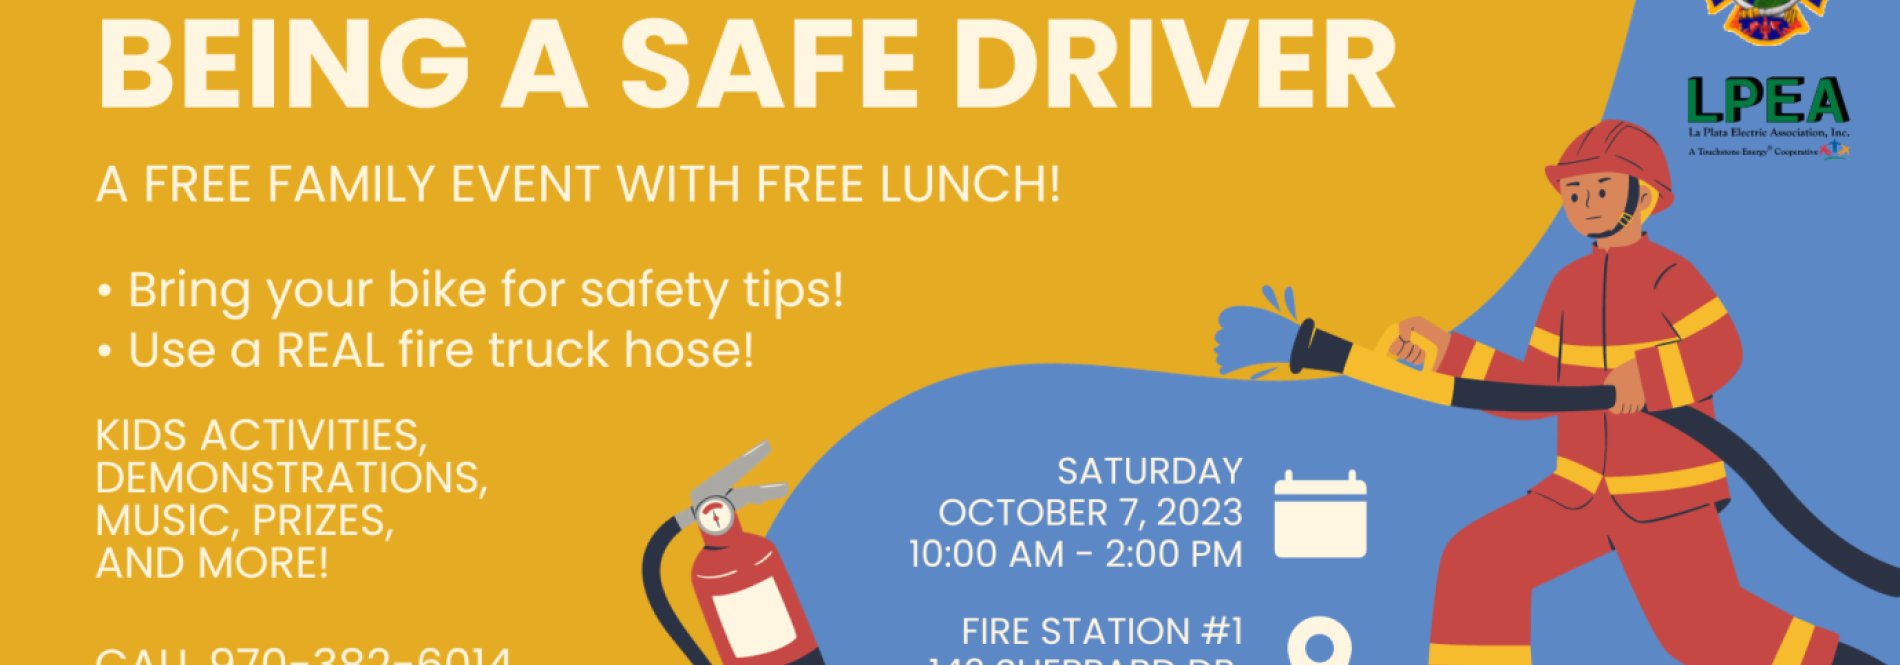 Durango Fire District and LPEA 2023 Safety Event